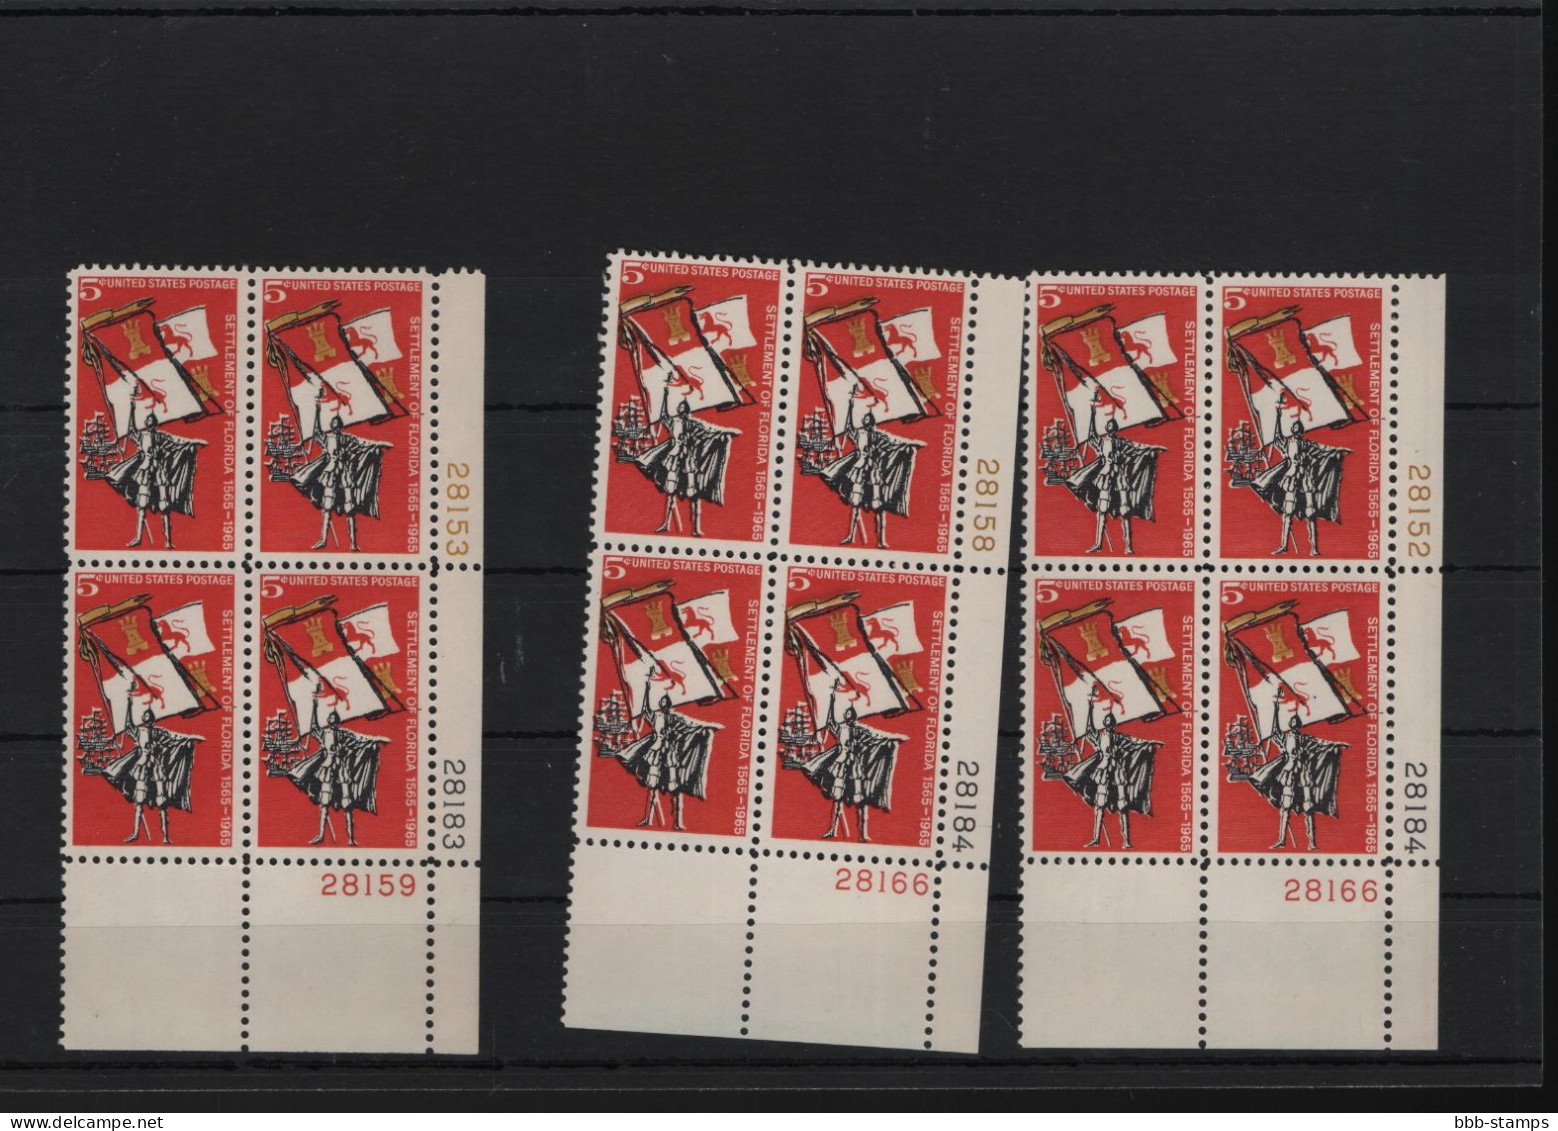 USA Michel Cat.No. mnh/** 887 different positions and different plate nos